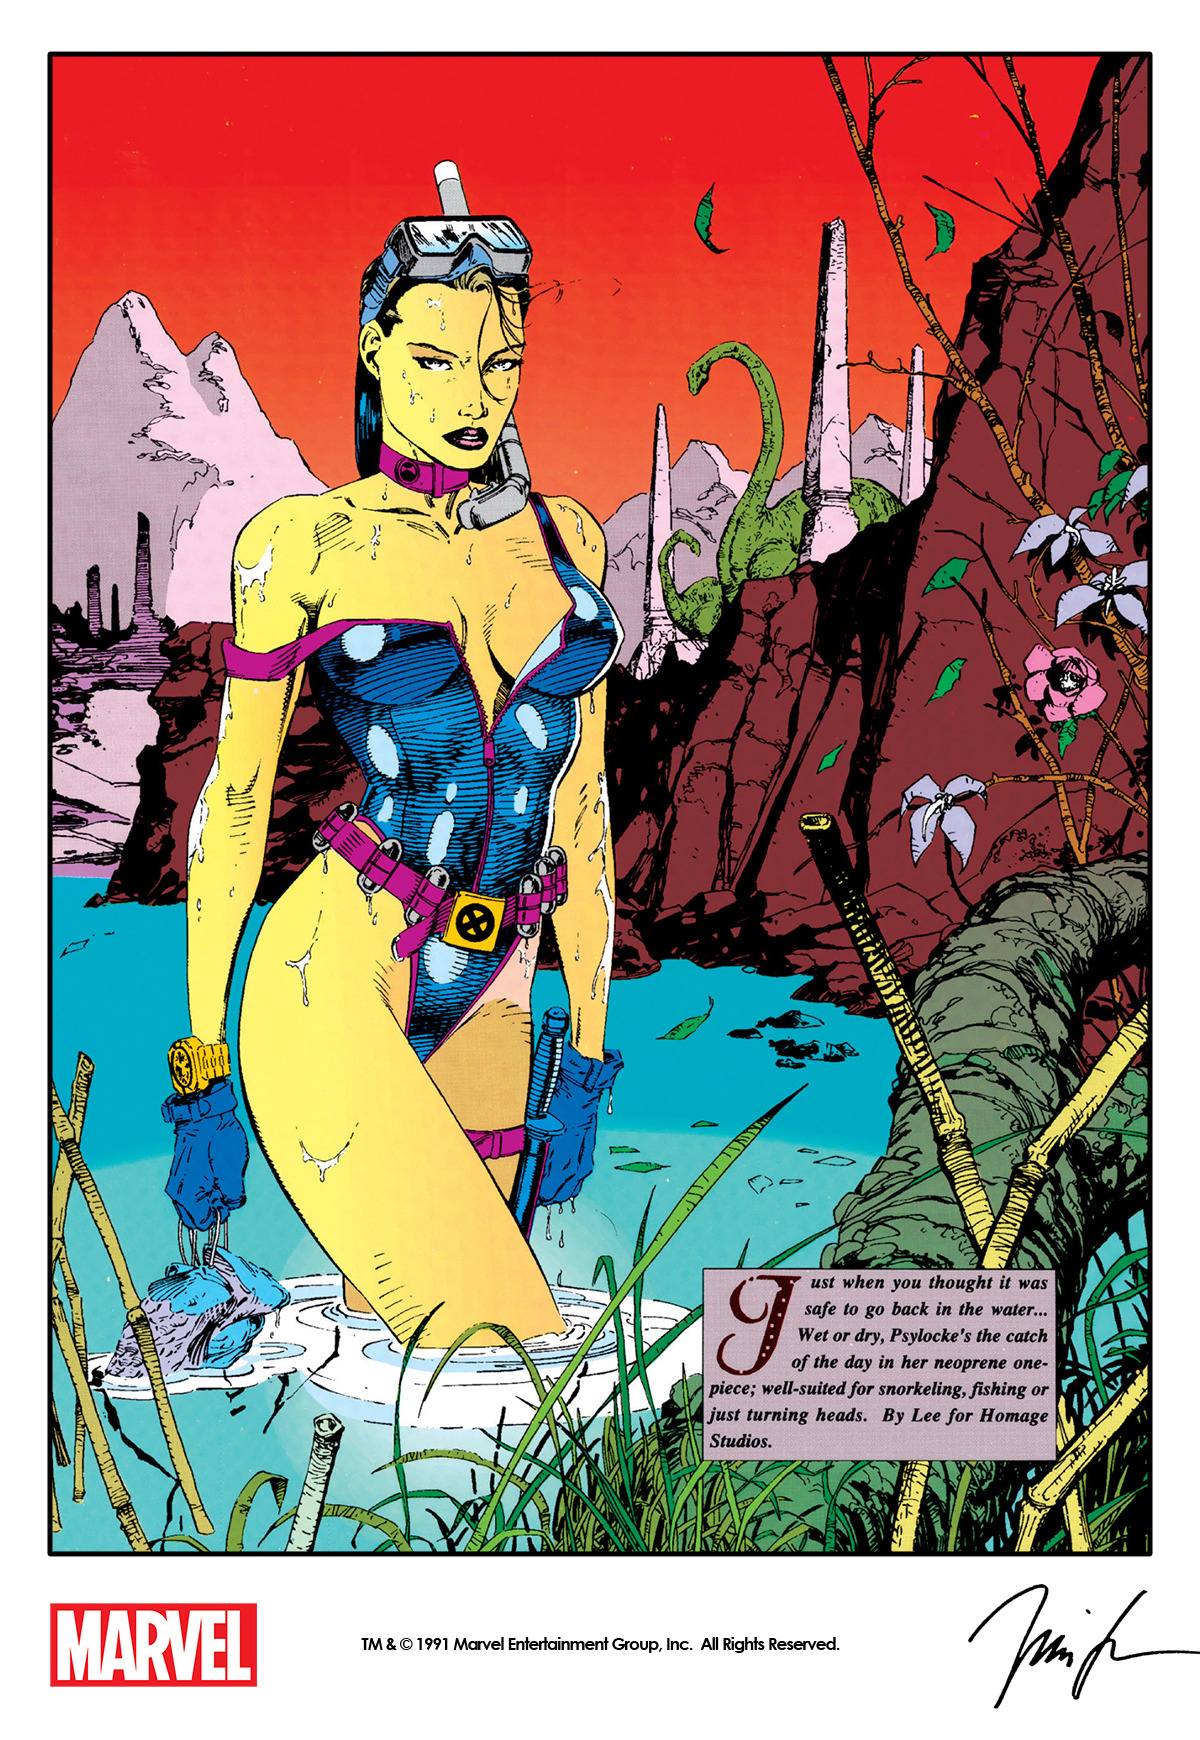 Psylocke by Jim Lee from Marvel Illustrated: The... - The Marvel Project